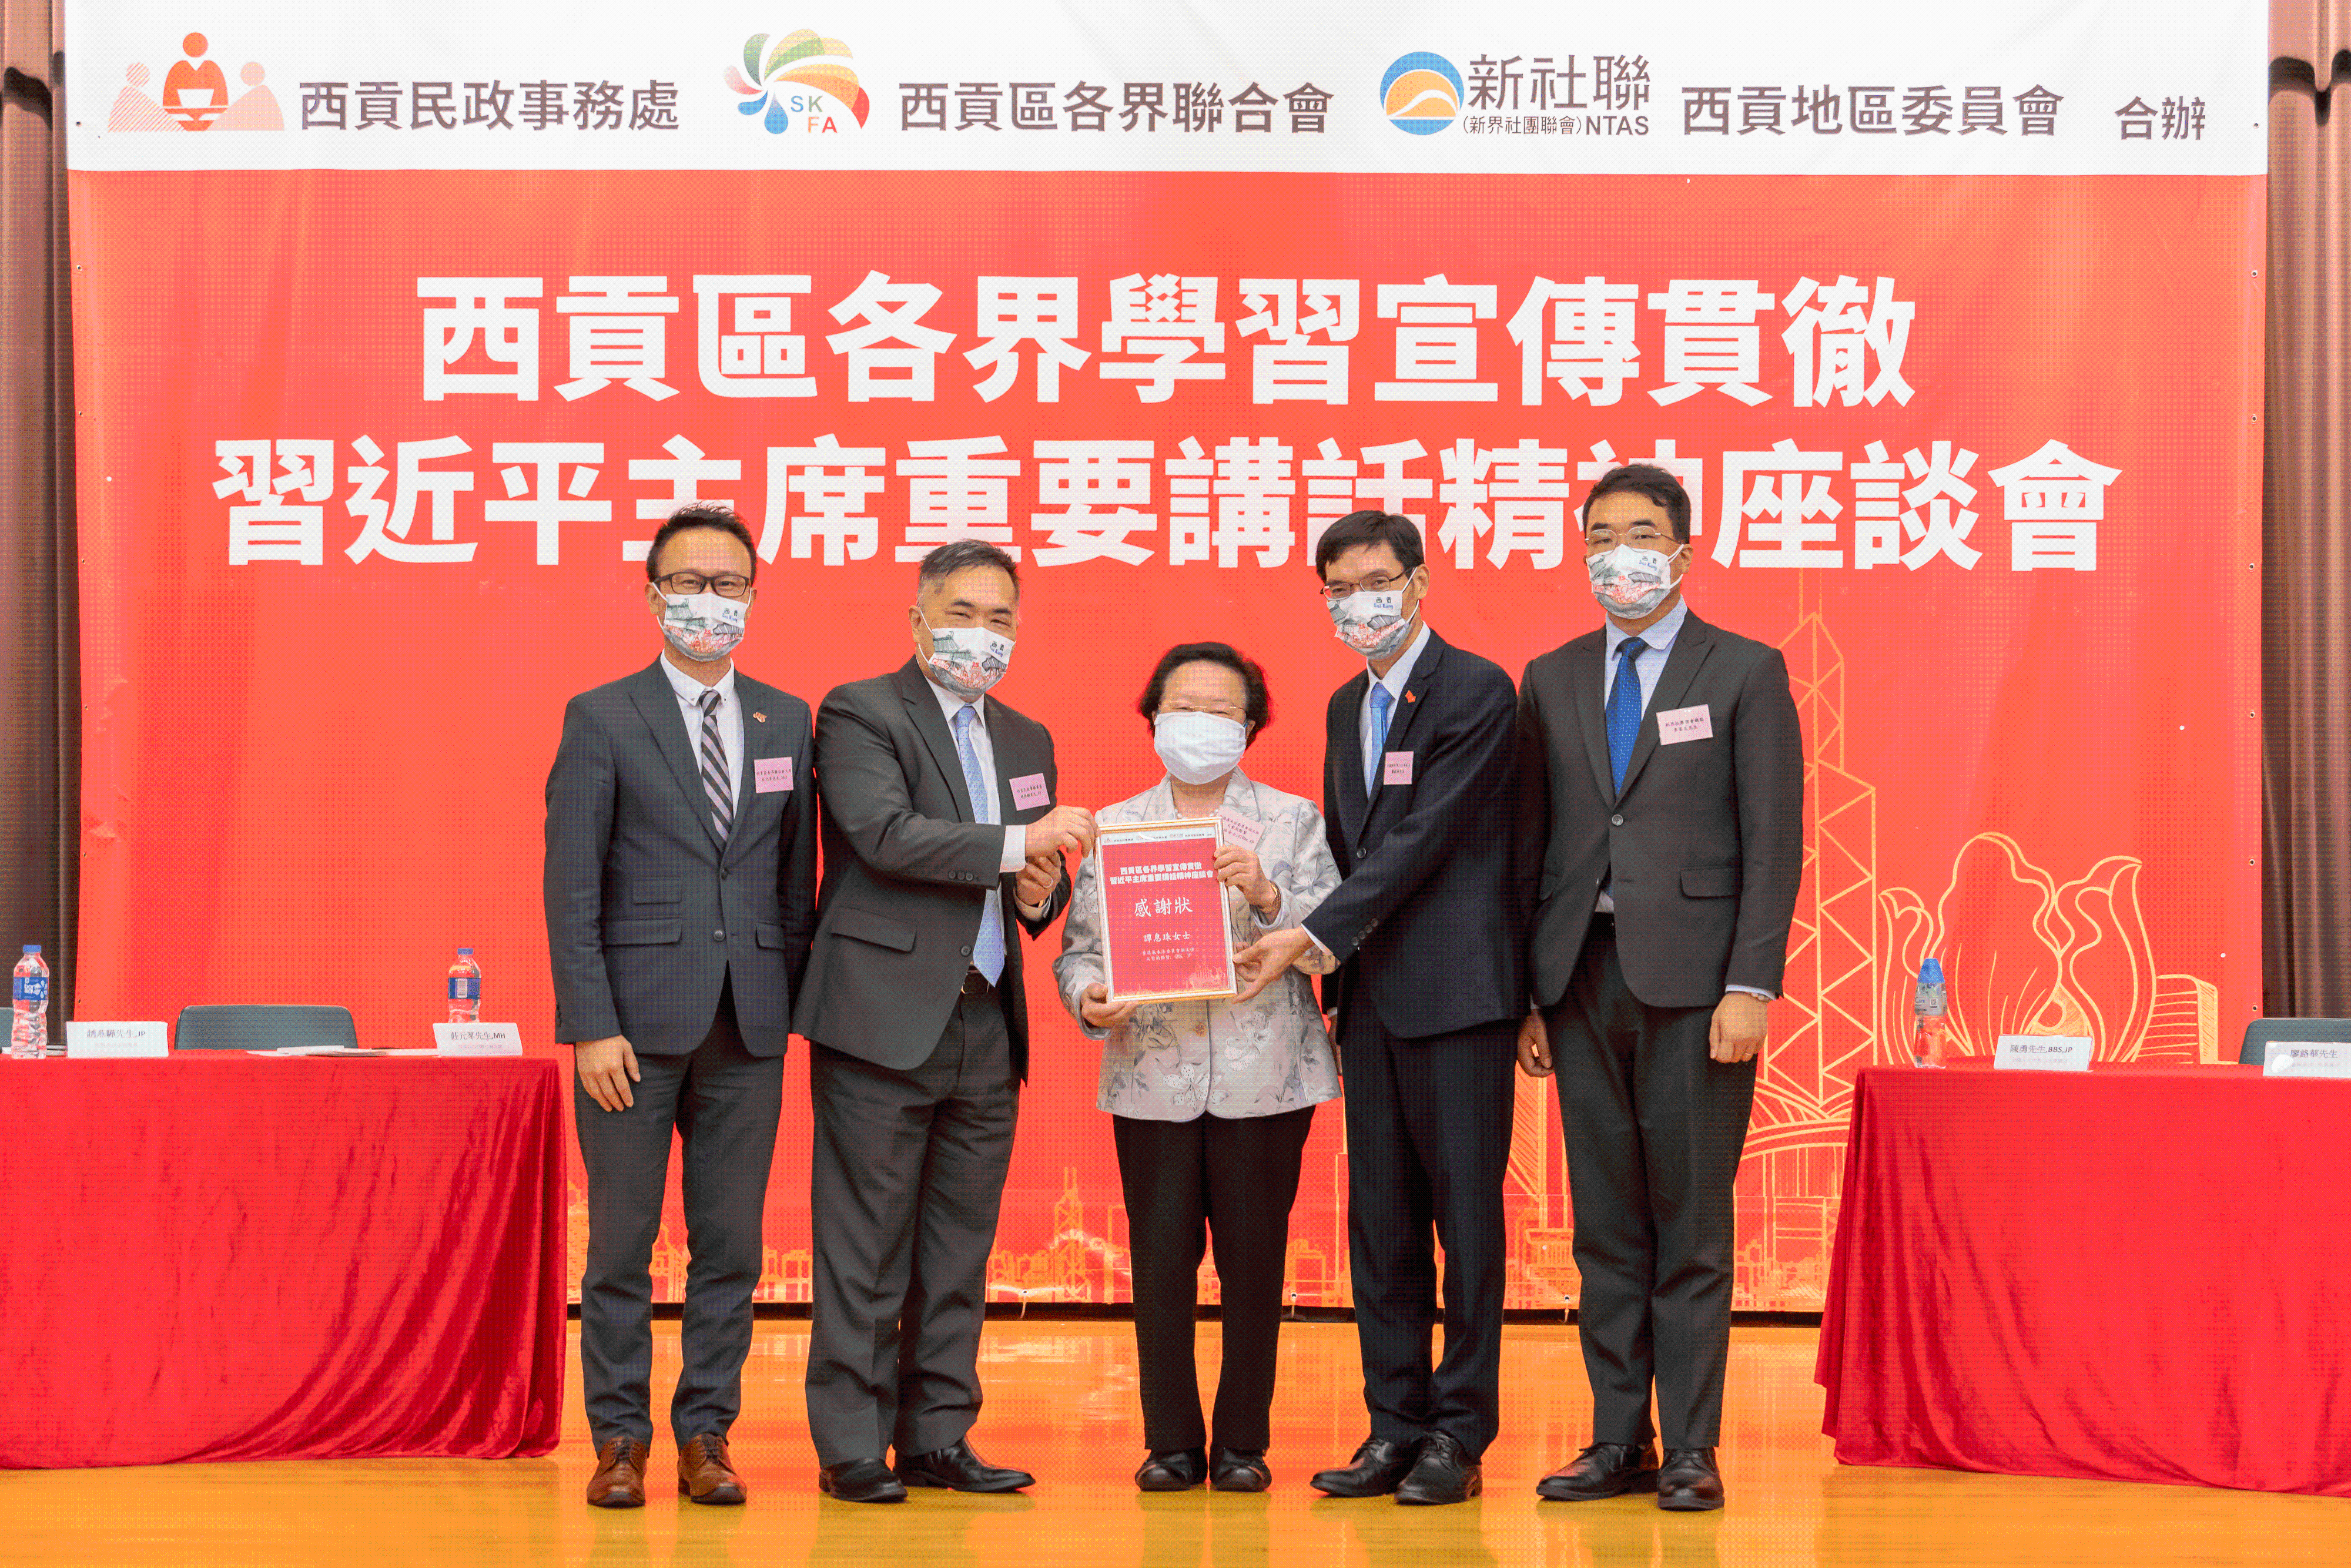 The Sai Kung District Office, in collaboration with the New Territories Association of Societies Sai Kung District Committee and the Sai Kung Federation of Associations jointly held the "Session to Learn About, Promote and Implement the Spirit of President Xi's Important Speech" at Sheung Tak Community Hall on July 16. Photo shows the Vice-chairperson of the Hong Kong Special Administrative Region (HKSAR) Basic Law Committee of the National People's Congress, Ms Maria Tam (centre), receiving a certificate of appreciation. Next to her are the District Officer (Sai Kung), Mr David Chiu (second left), and the Division Chief of the New Territories Sub-office of the Liaison Office of the Central People's Government in the HKSAR, Mr Liao Minghua (second right).  